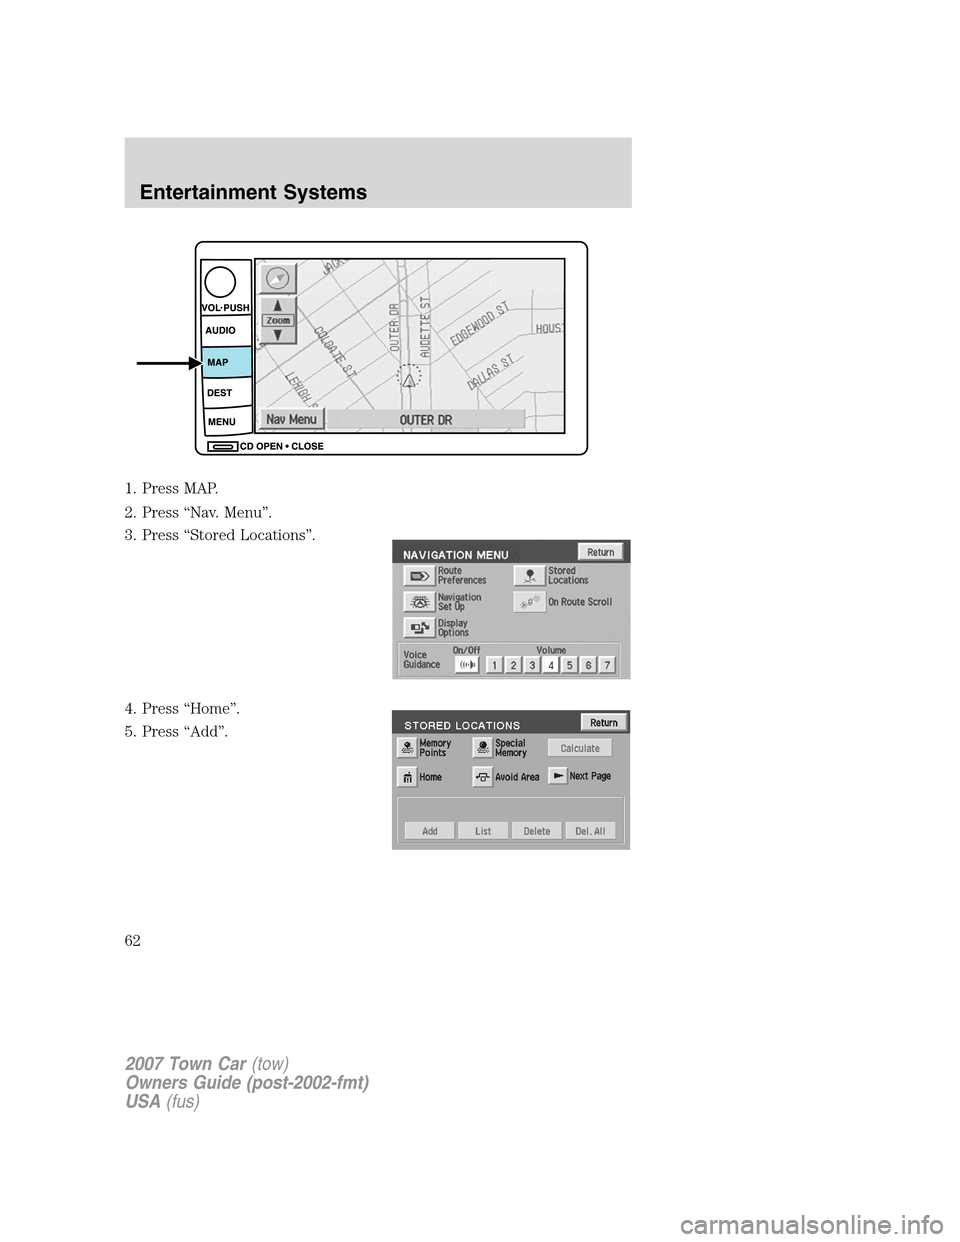 LINCOLN TOWN CAR 2007 Repair Manual 1. Press MAP.
2. Press “Nav. Menu”.
3. Press “Stored Locations”.
4. Press “Home”.
5. Press “Add”.
2007 Town Car(tow)
Owners Guide (post-2002-fmt)
USA(fus)
Entertainment Systems
62 